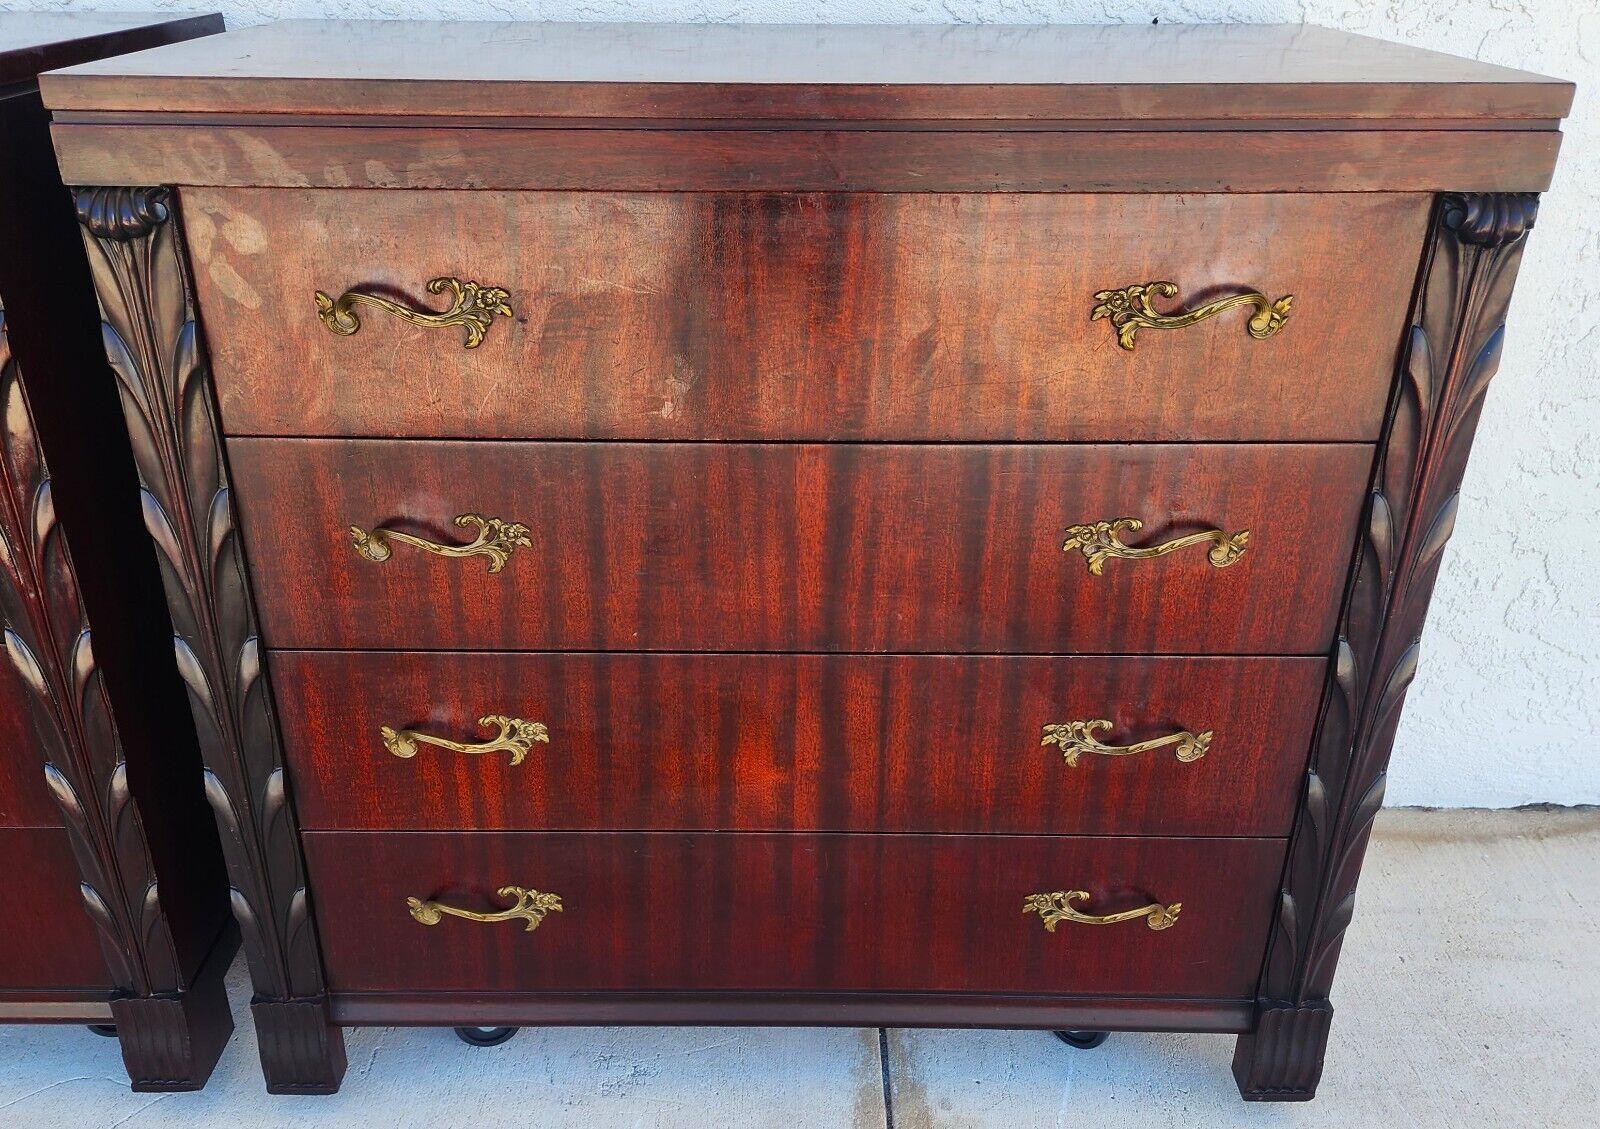 For FULL item description click on CONTINUE READING at the bottom of this page.

Offering One Of Our Recent Palm Beach Estate Fine Furniture Acquisitions Of A 
Pair of Mid-Century King Nightstands or Gentleman's Chests in Rosewood by John